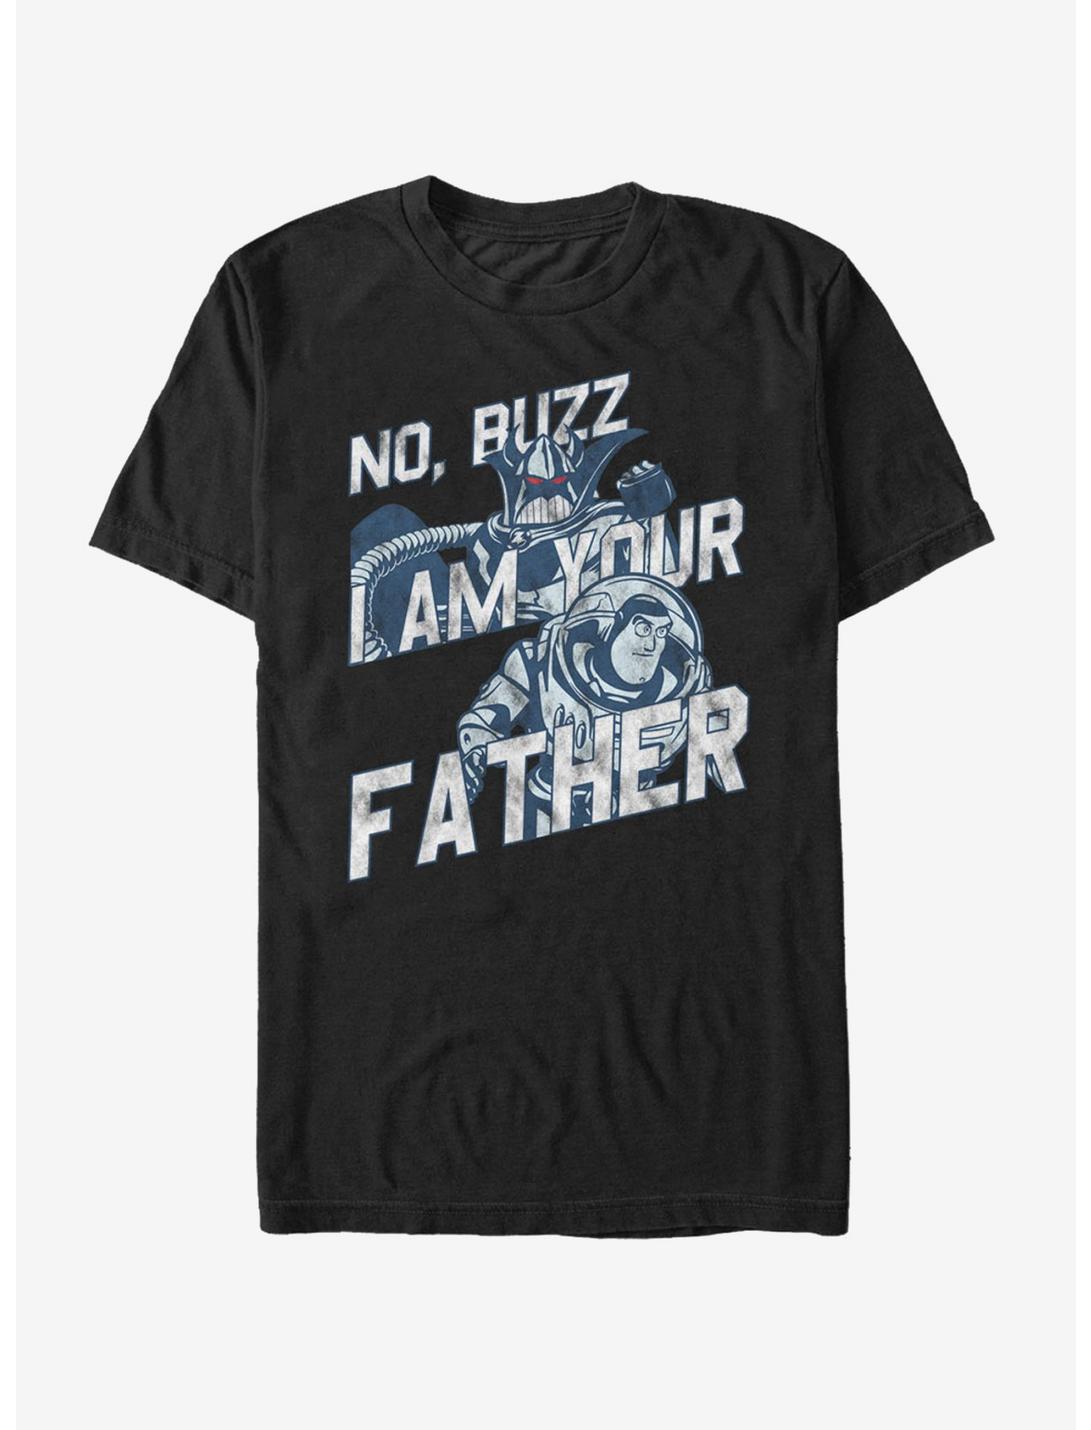 Toy Story Zurg Buzz I am Your Father T-Shirt, BLACK, hi-res